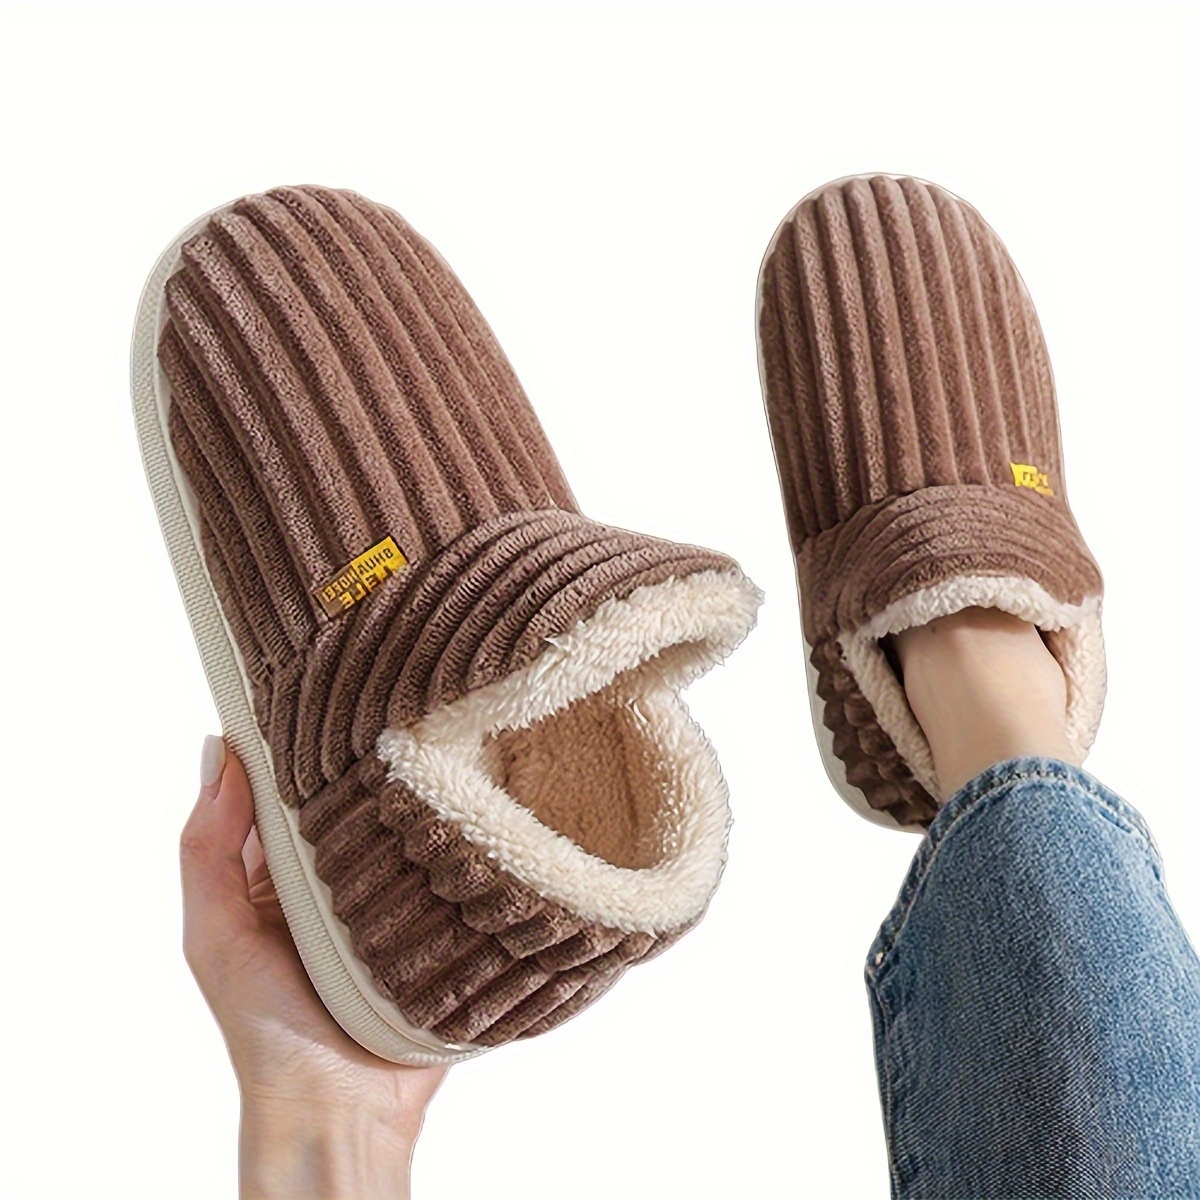 

Women's Casual Shoes Worn And Cotton Shoes Home Slippers Daily Shoes For Indoor And Outdoor